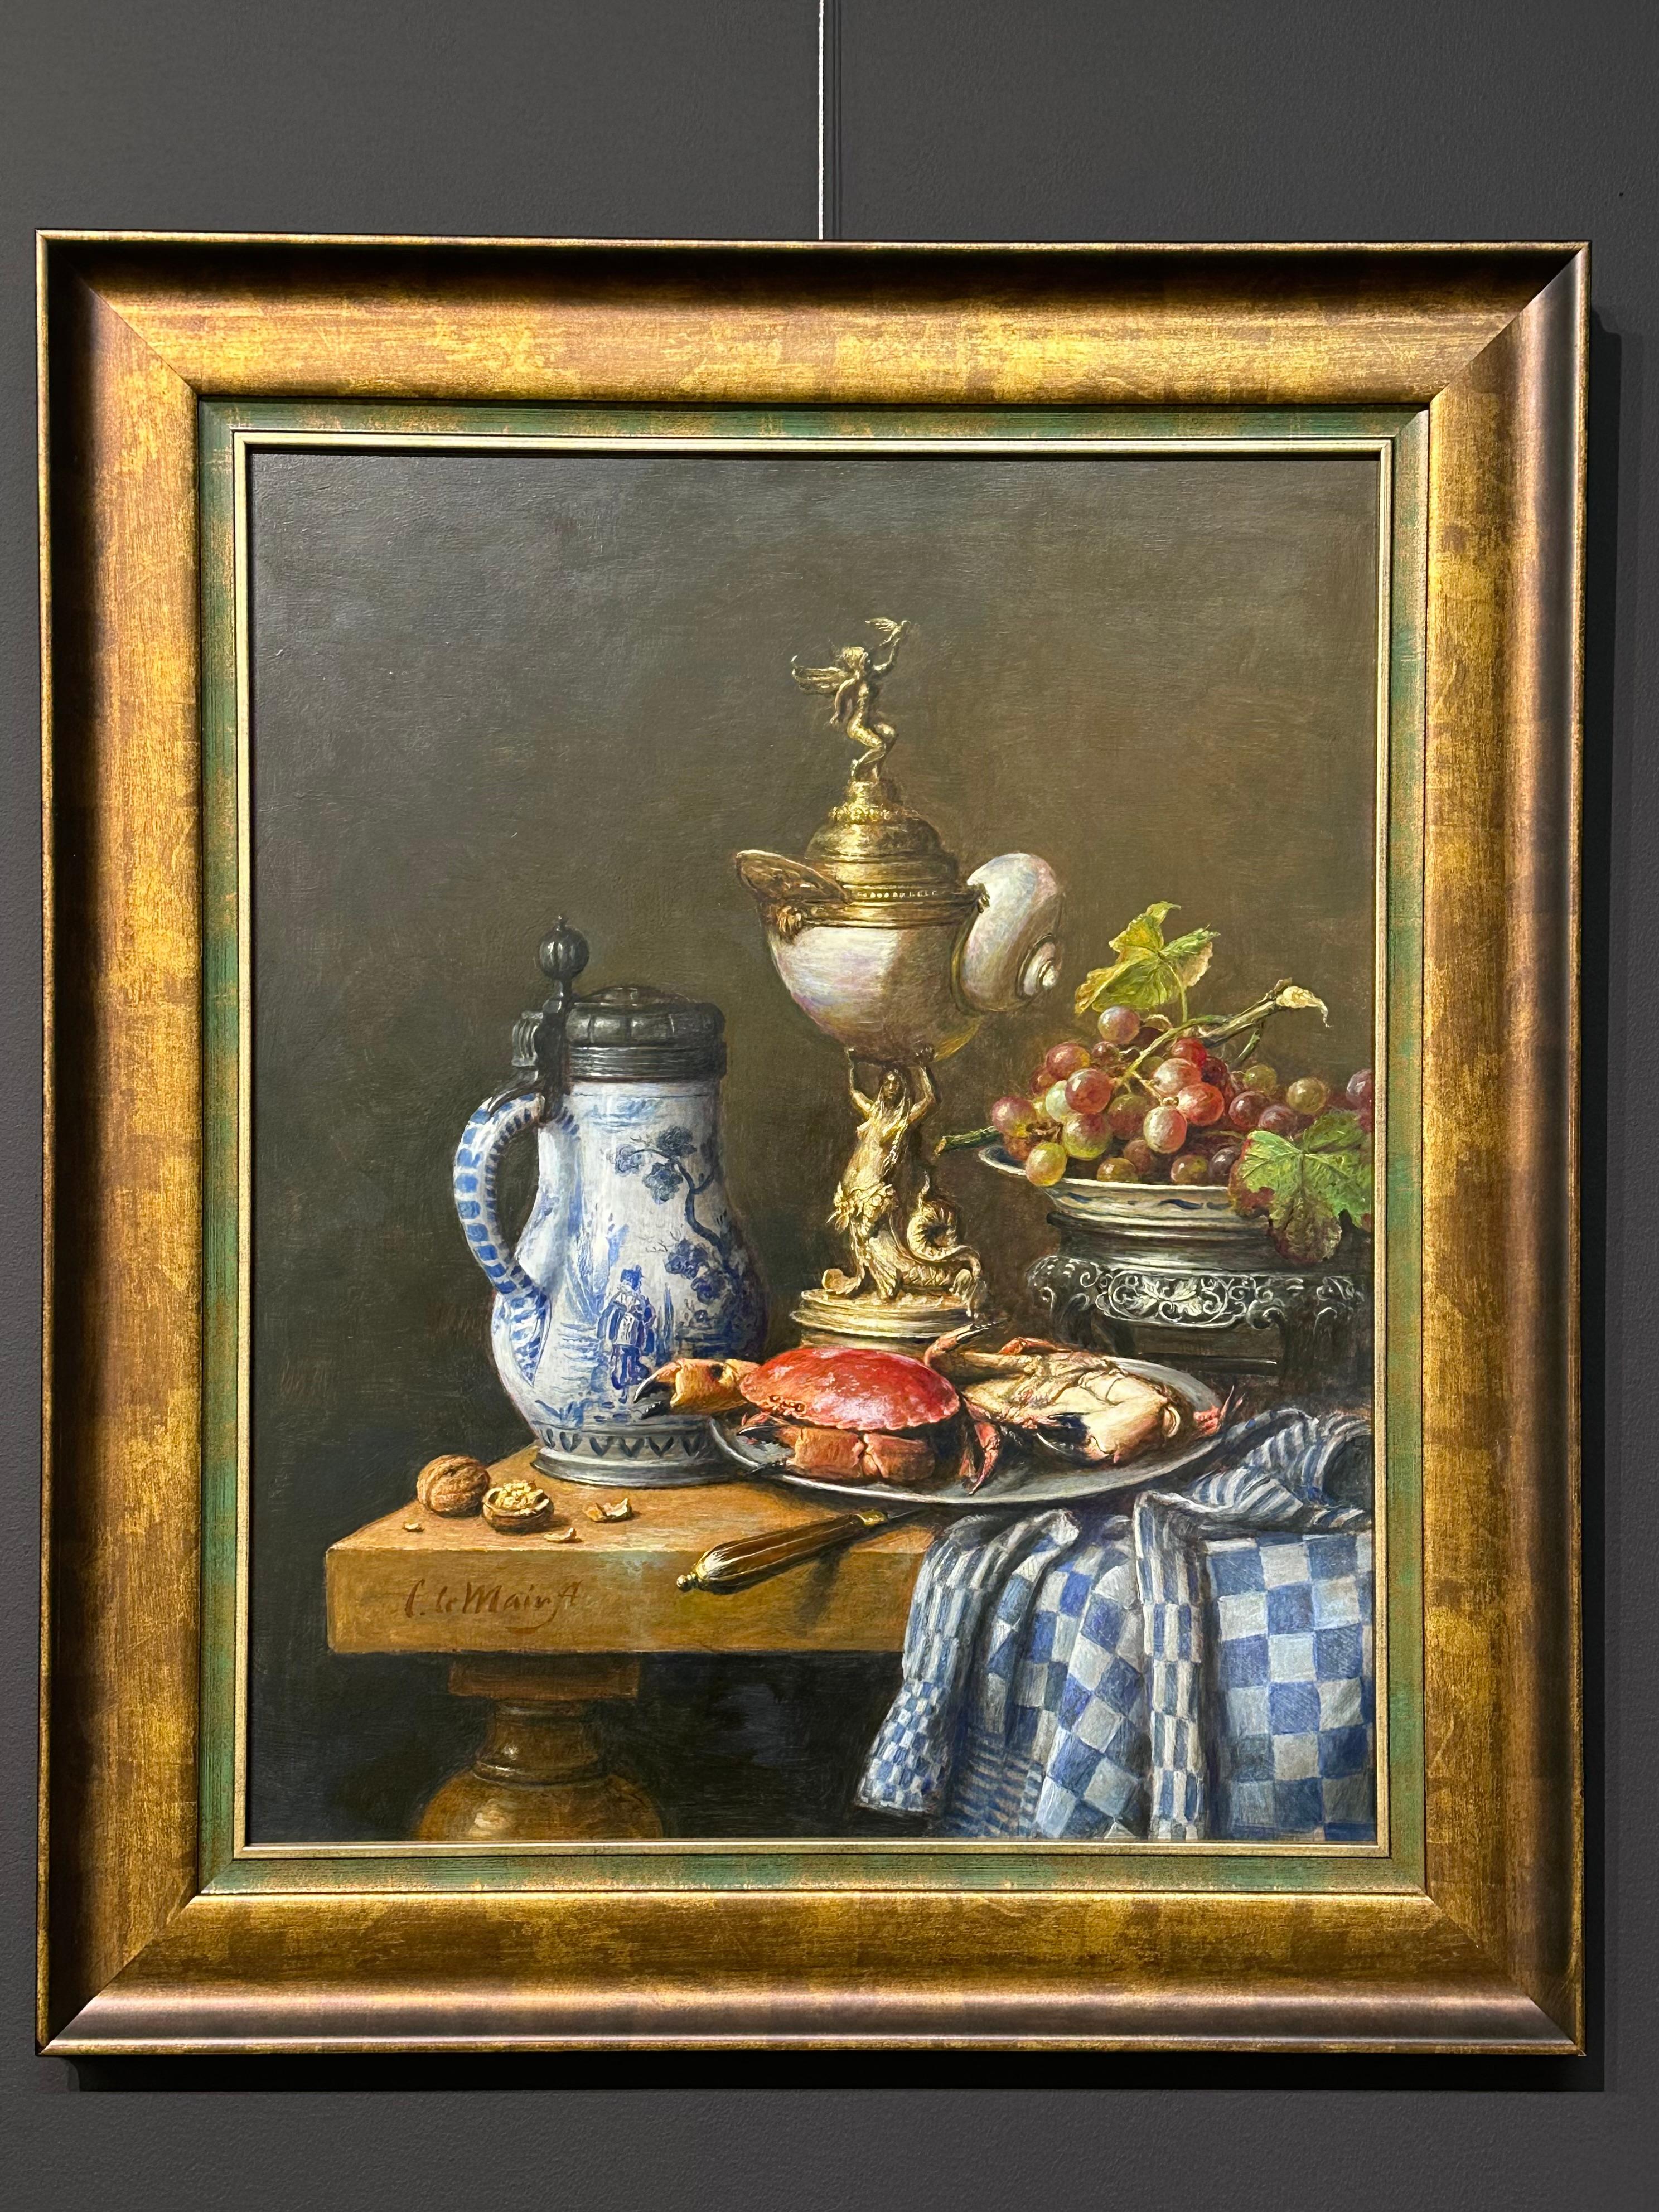 Cornelis le Mair
Still life with Delft Blue Lid Jar, Shell Cup and Crabs
68 x 55 cm (framed 88 x 75 cm) Frame is included in price
Oil on wood panel 
 
On the last picture the painter himself, painted by himself. This selfportrait is also available